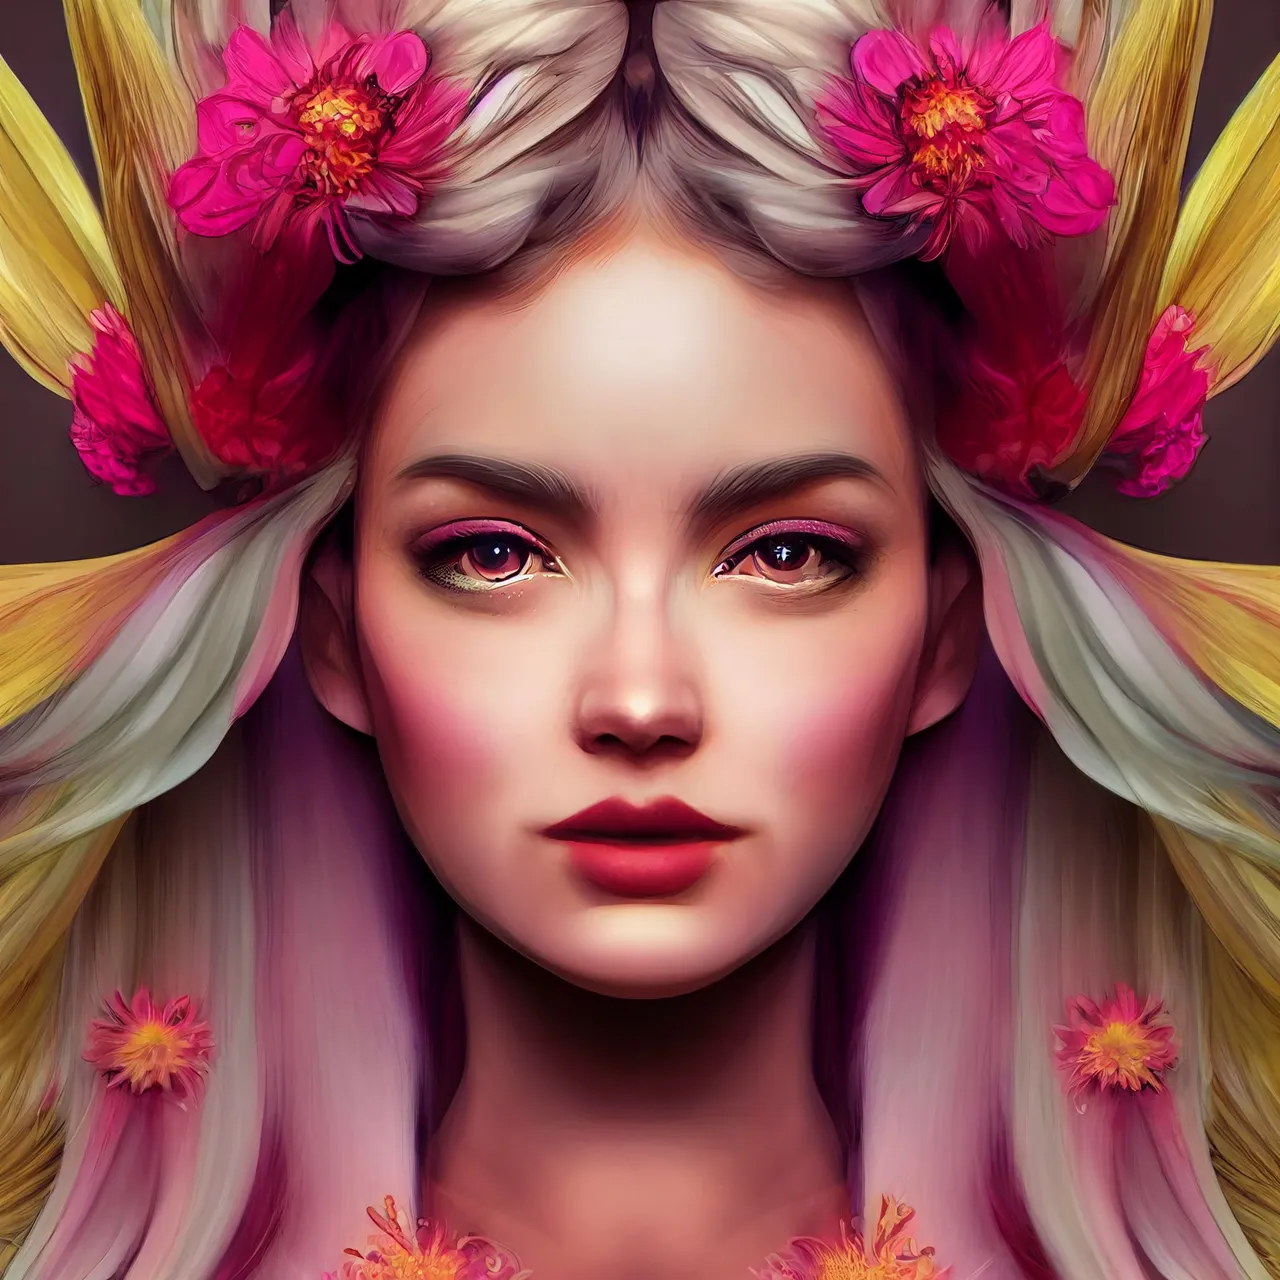 mamrita_empowered_goddess_one_with_nature_flowers_in_hair_white_f4561f70-1b95-4400-a7f1-03dc1ec9078f.png